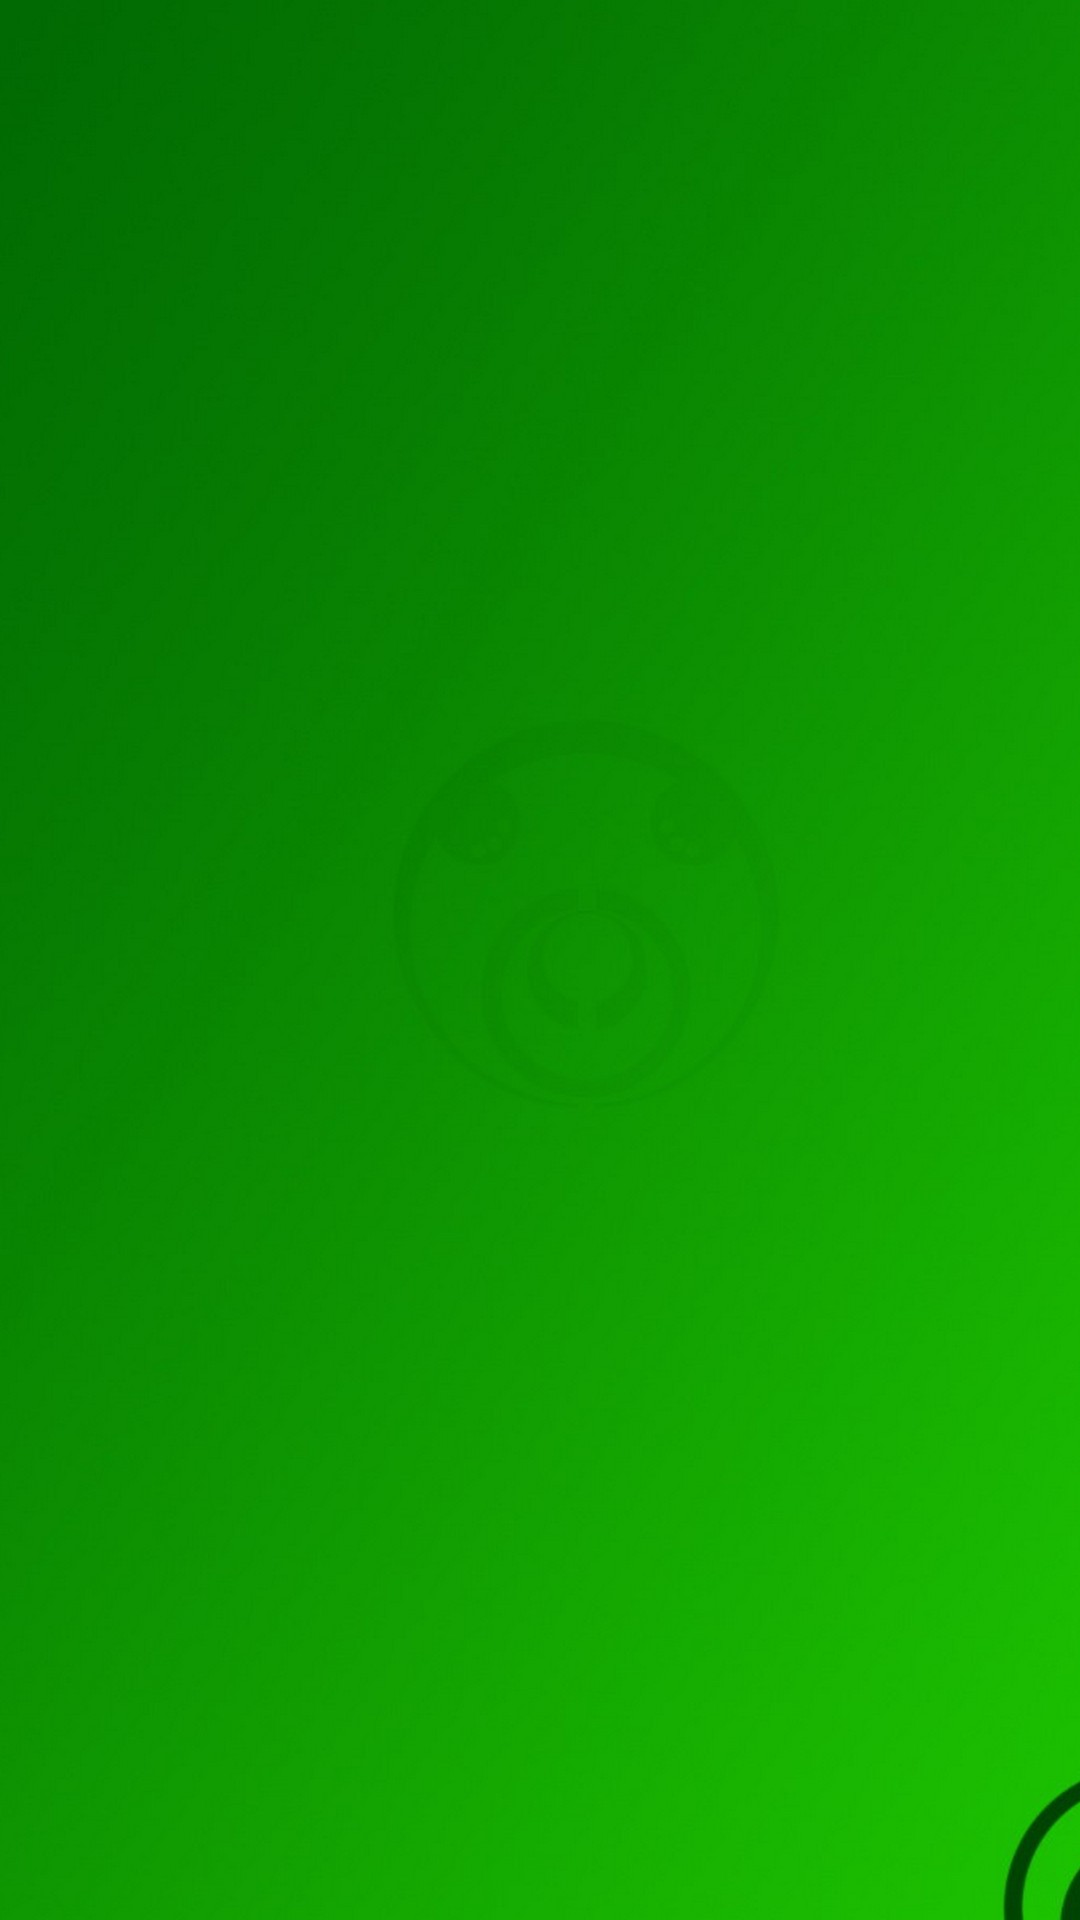 Dark Green Backgrounds For Android with image resolution 1080x1920 pixel. You can make this wallpaper for your Android backgrounds, Tablet, Smartphones Screensavers and Mobile Phone Lock Screen